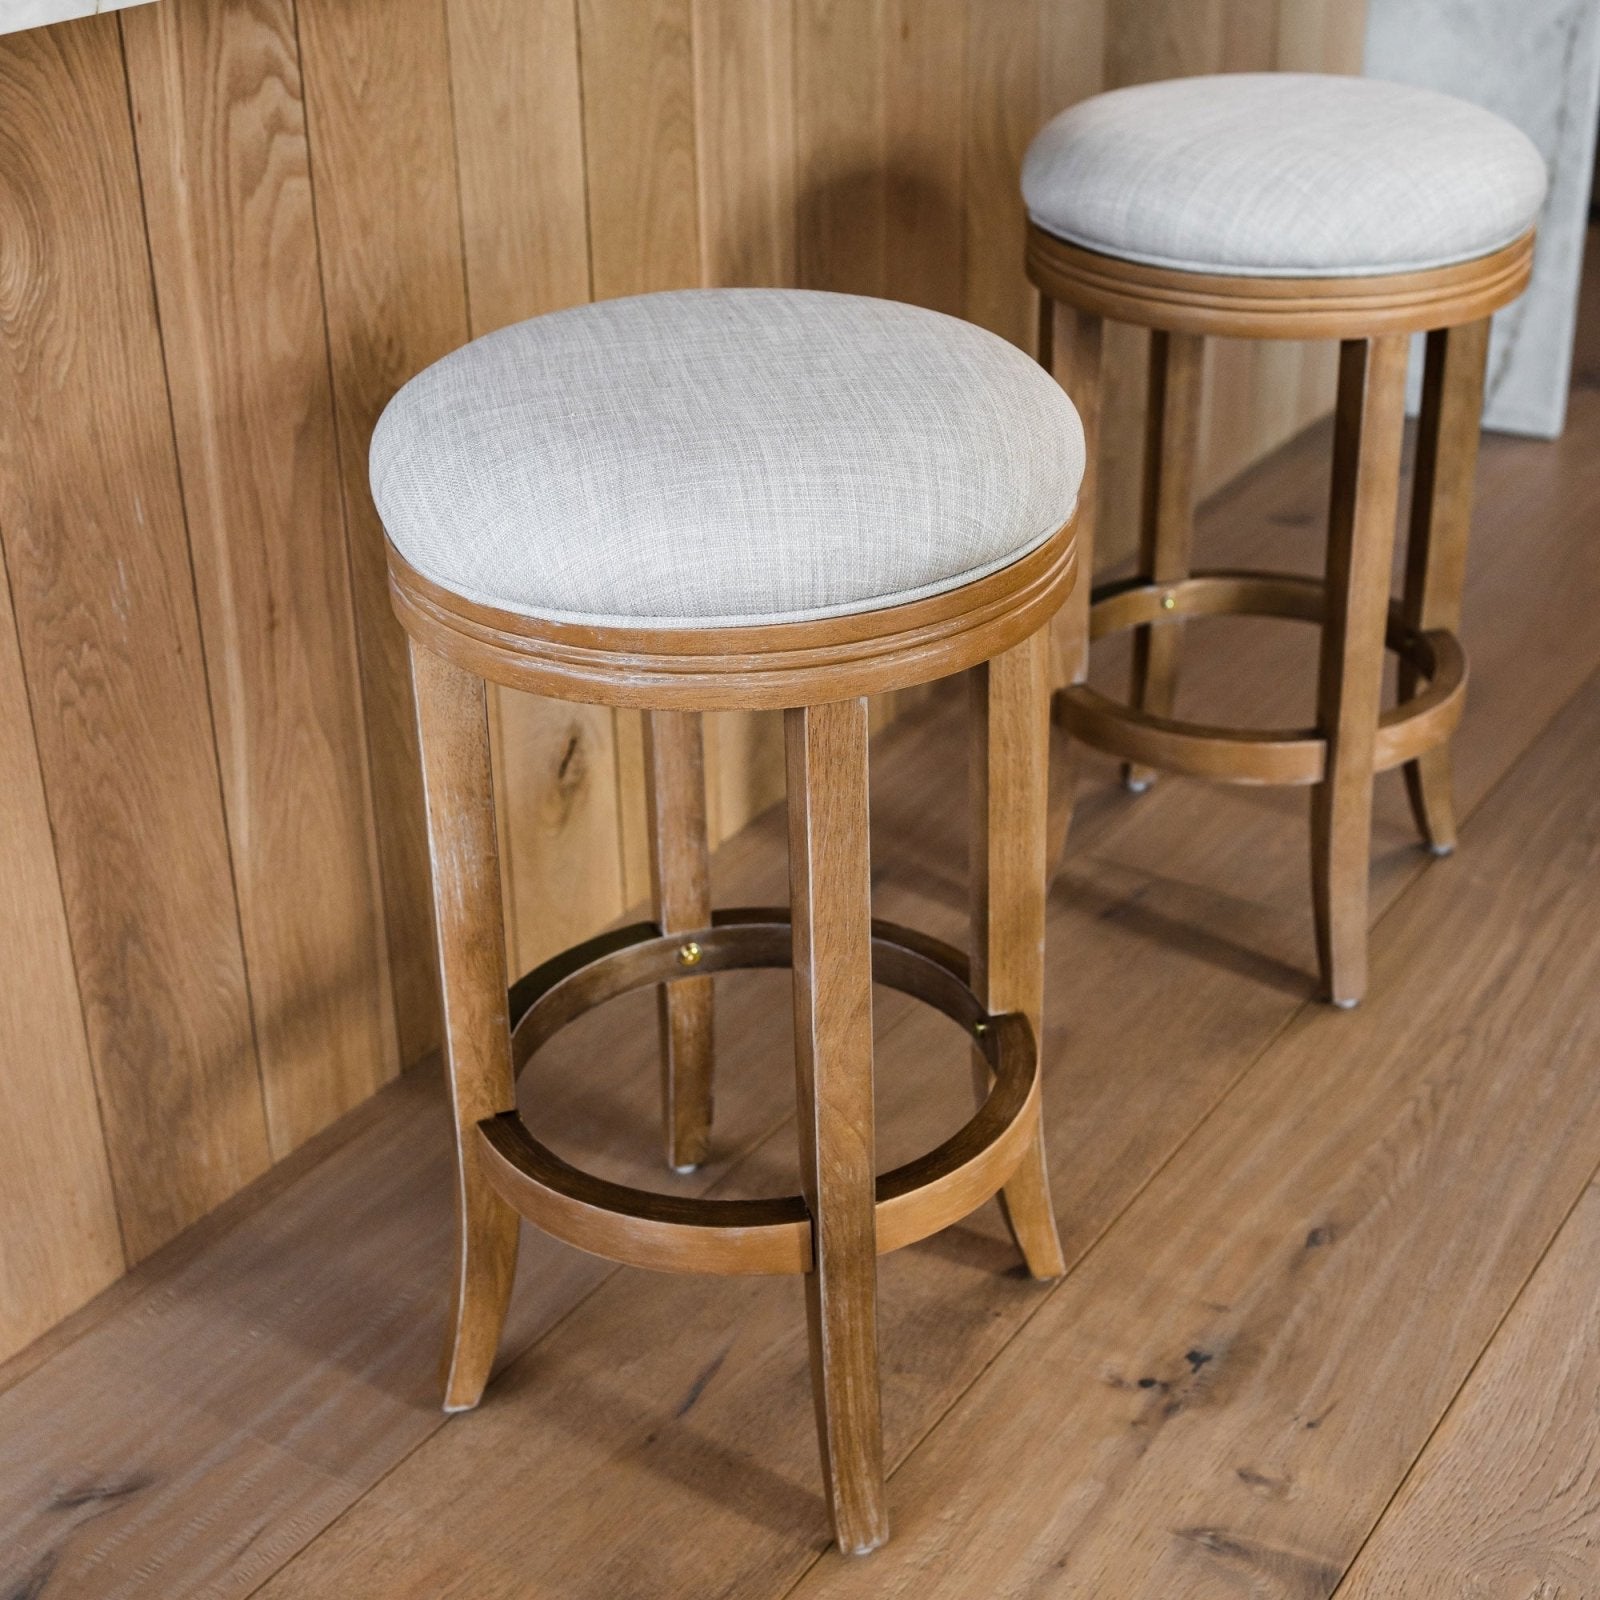 Eva Bar Stool in Weathered Oak Finish with Sand Color Fabric Upholstery in Stools by Maven Lane